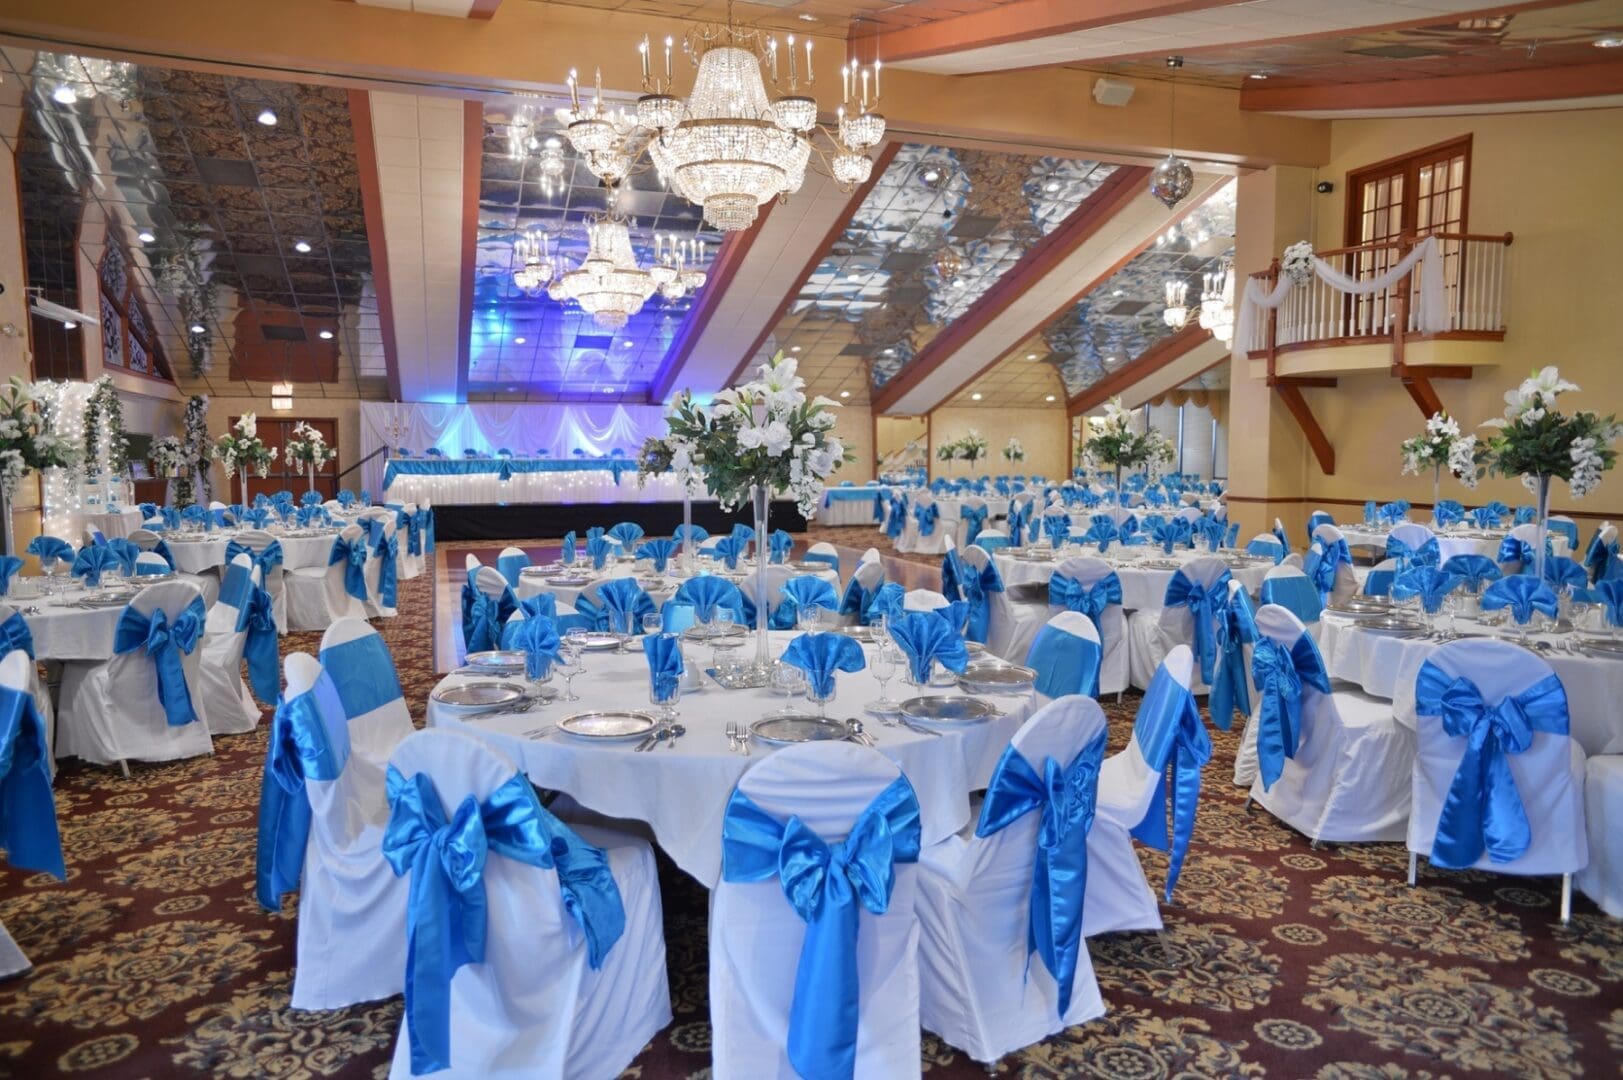 A banquet hall with tables and chairs set up for a wedding.